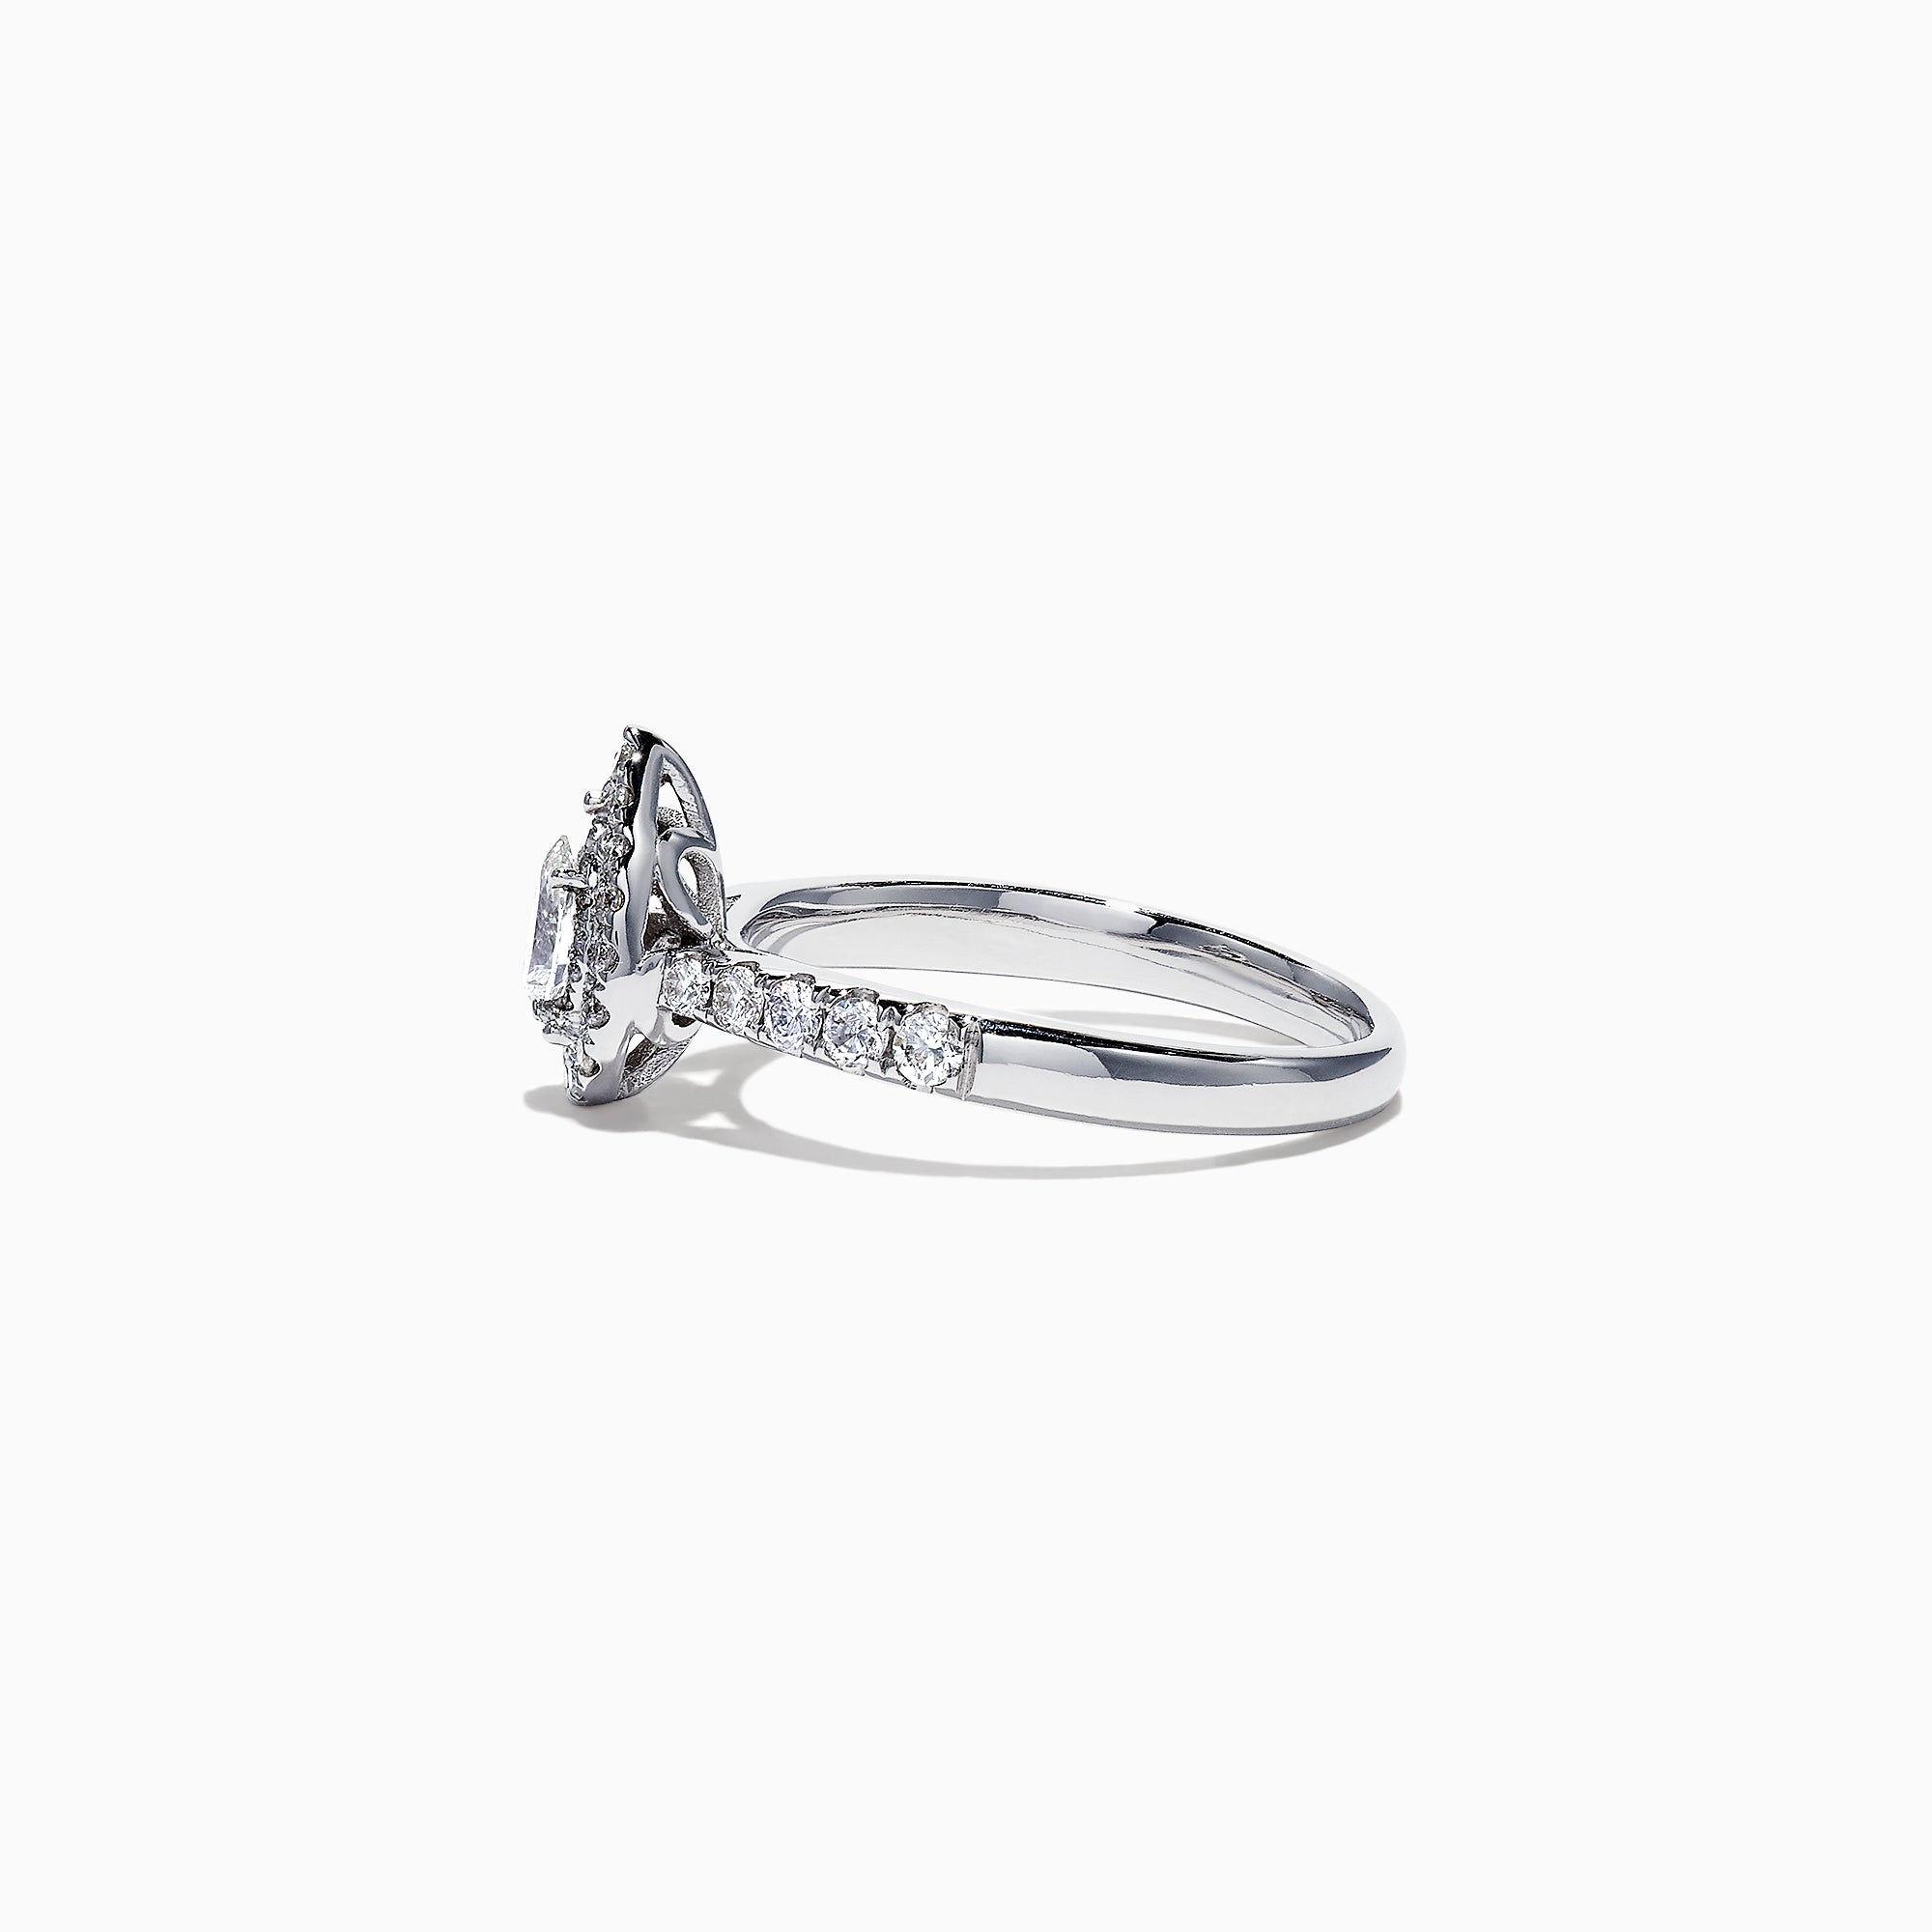 Effy Pave Classica 14K White Gold Diamond Pear Shaped Ring, 0.41 TCW